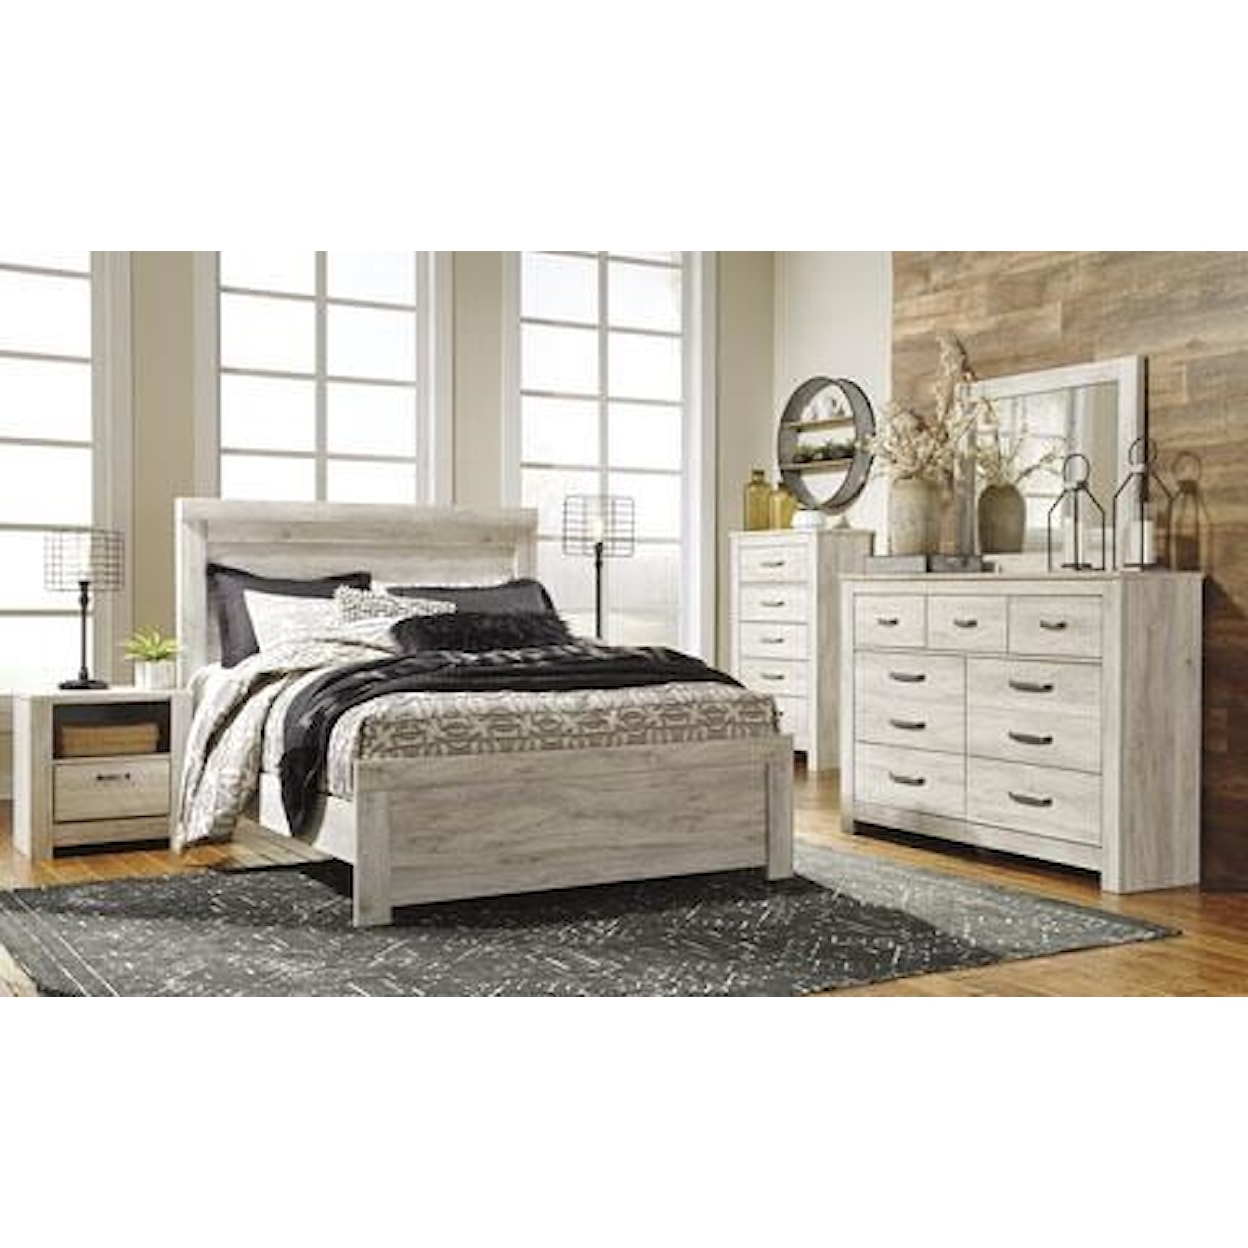 Signature Design by Ashley Bellaby 5pc Queen Panel Bedroom